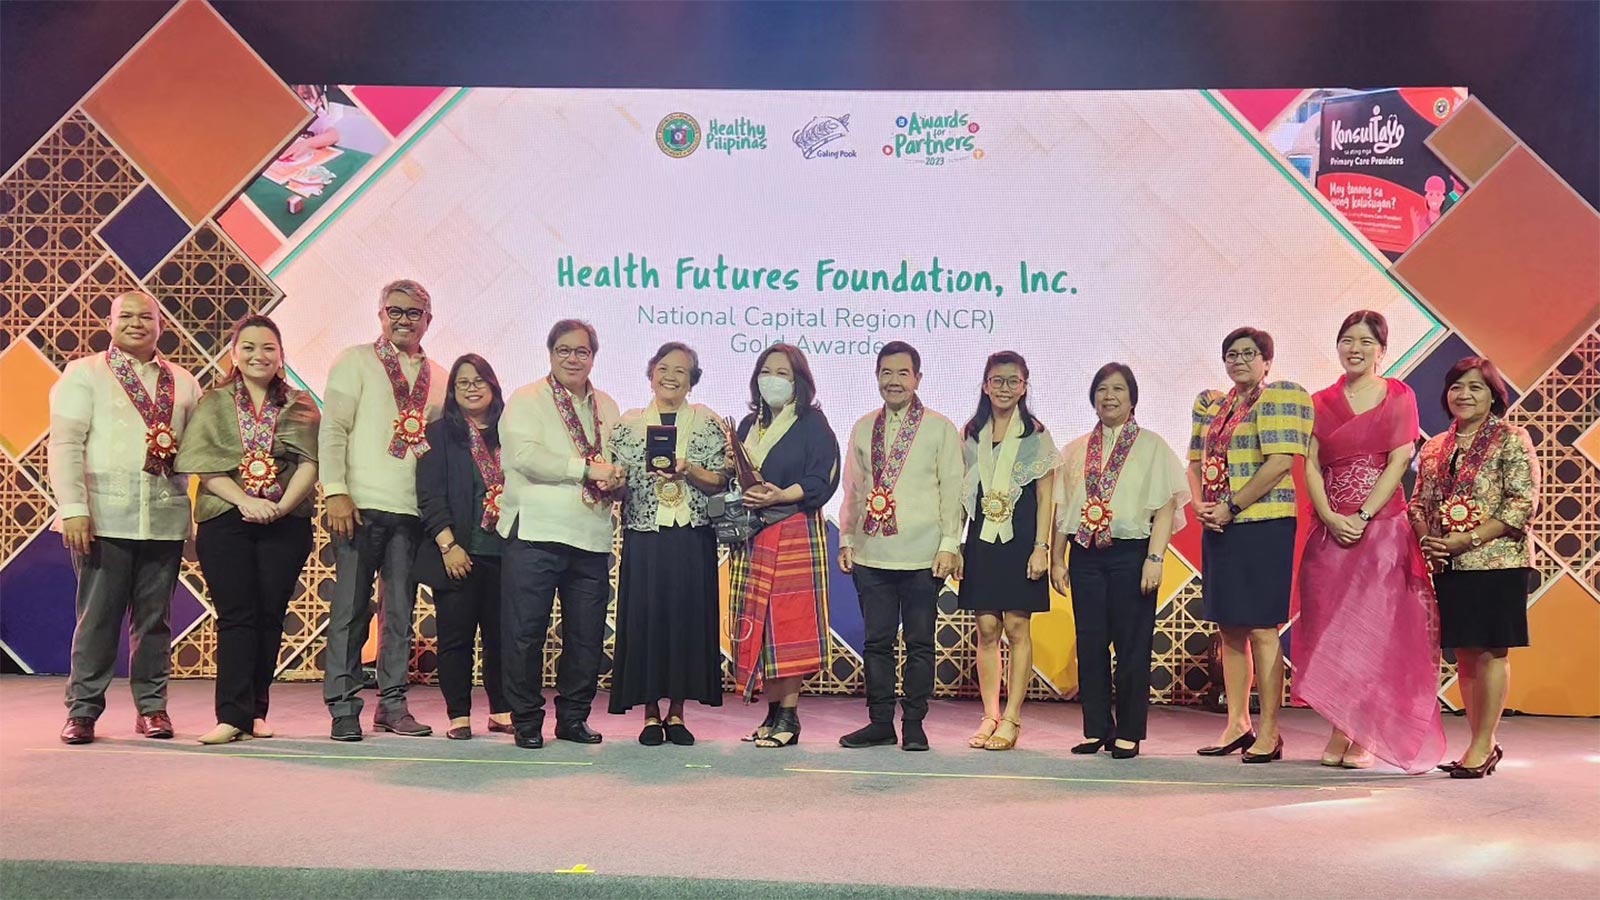 DOH Secretary Dr. Ted Herbosa presenting the Healthy Pilipinas Gold Award for Partners to Health Futures Foundation, Inc. (HFI)